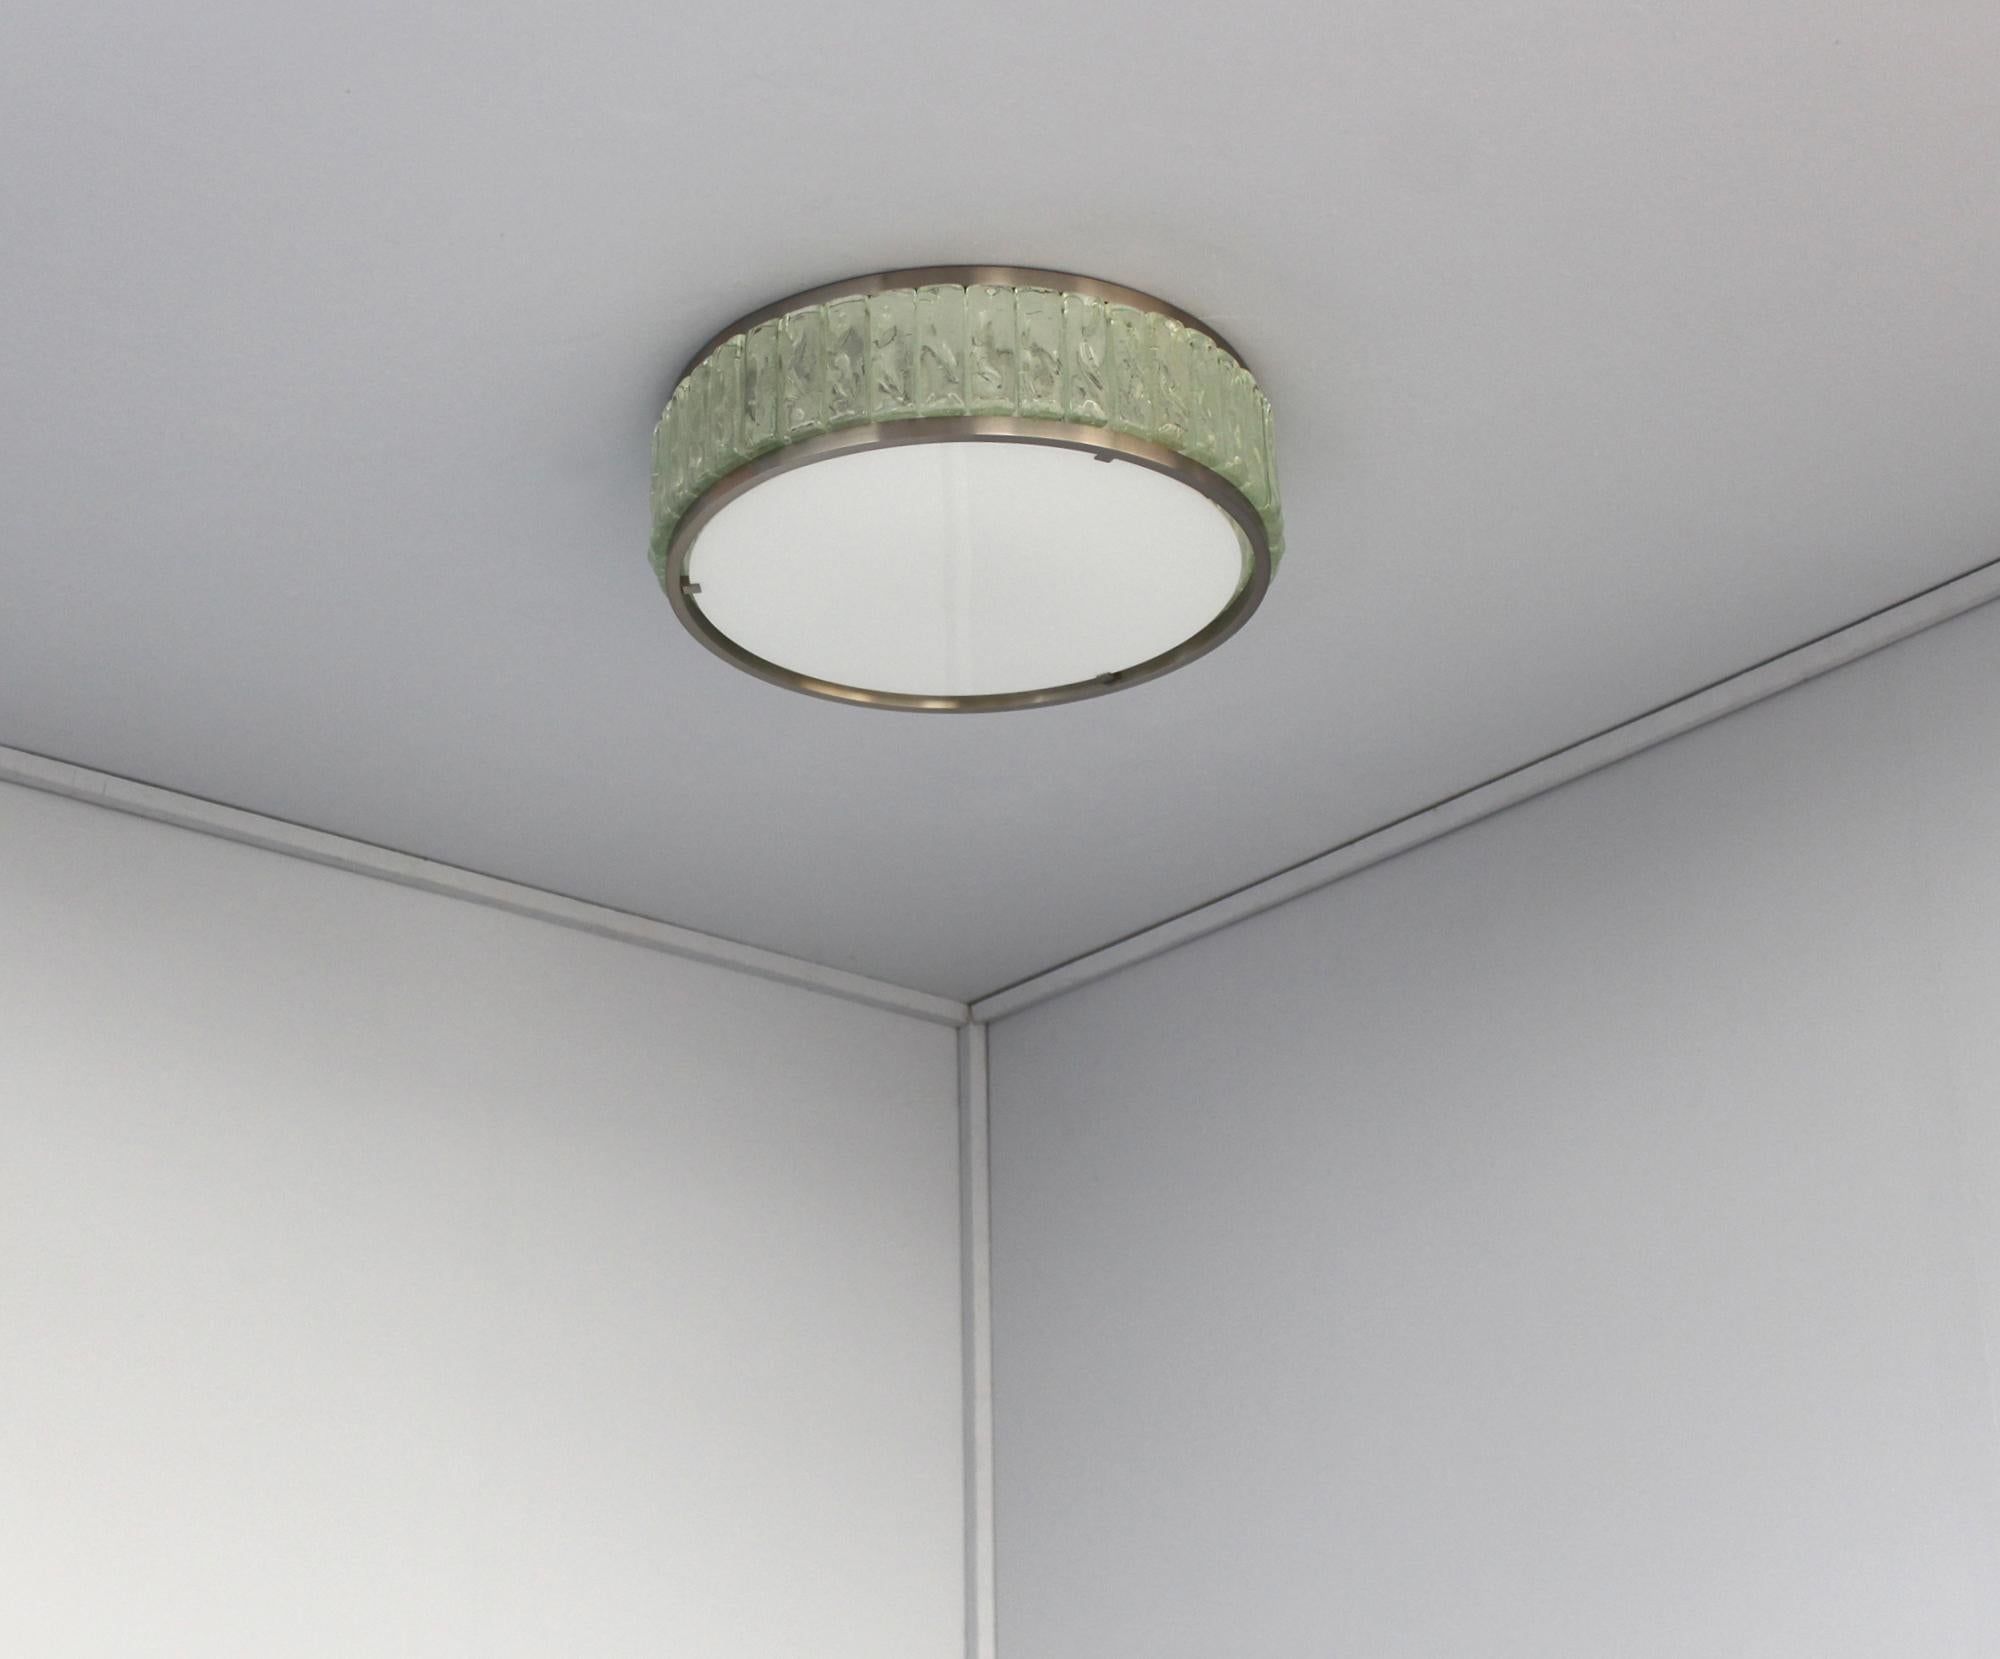 Atelier Jean Perzel - Fine French mid century round “Queens Necklace” flush mount / ceiling light made with rough laid glass slabs set between two brushed nickel mount rings and a white opaline glass diffuser (which is easy to remove for bulb